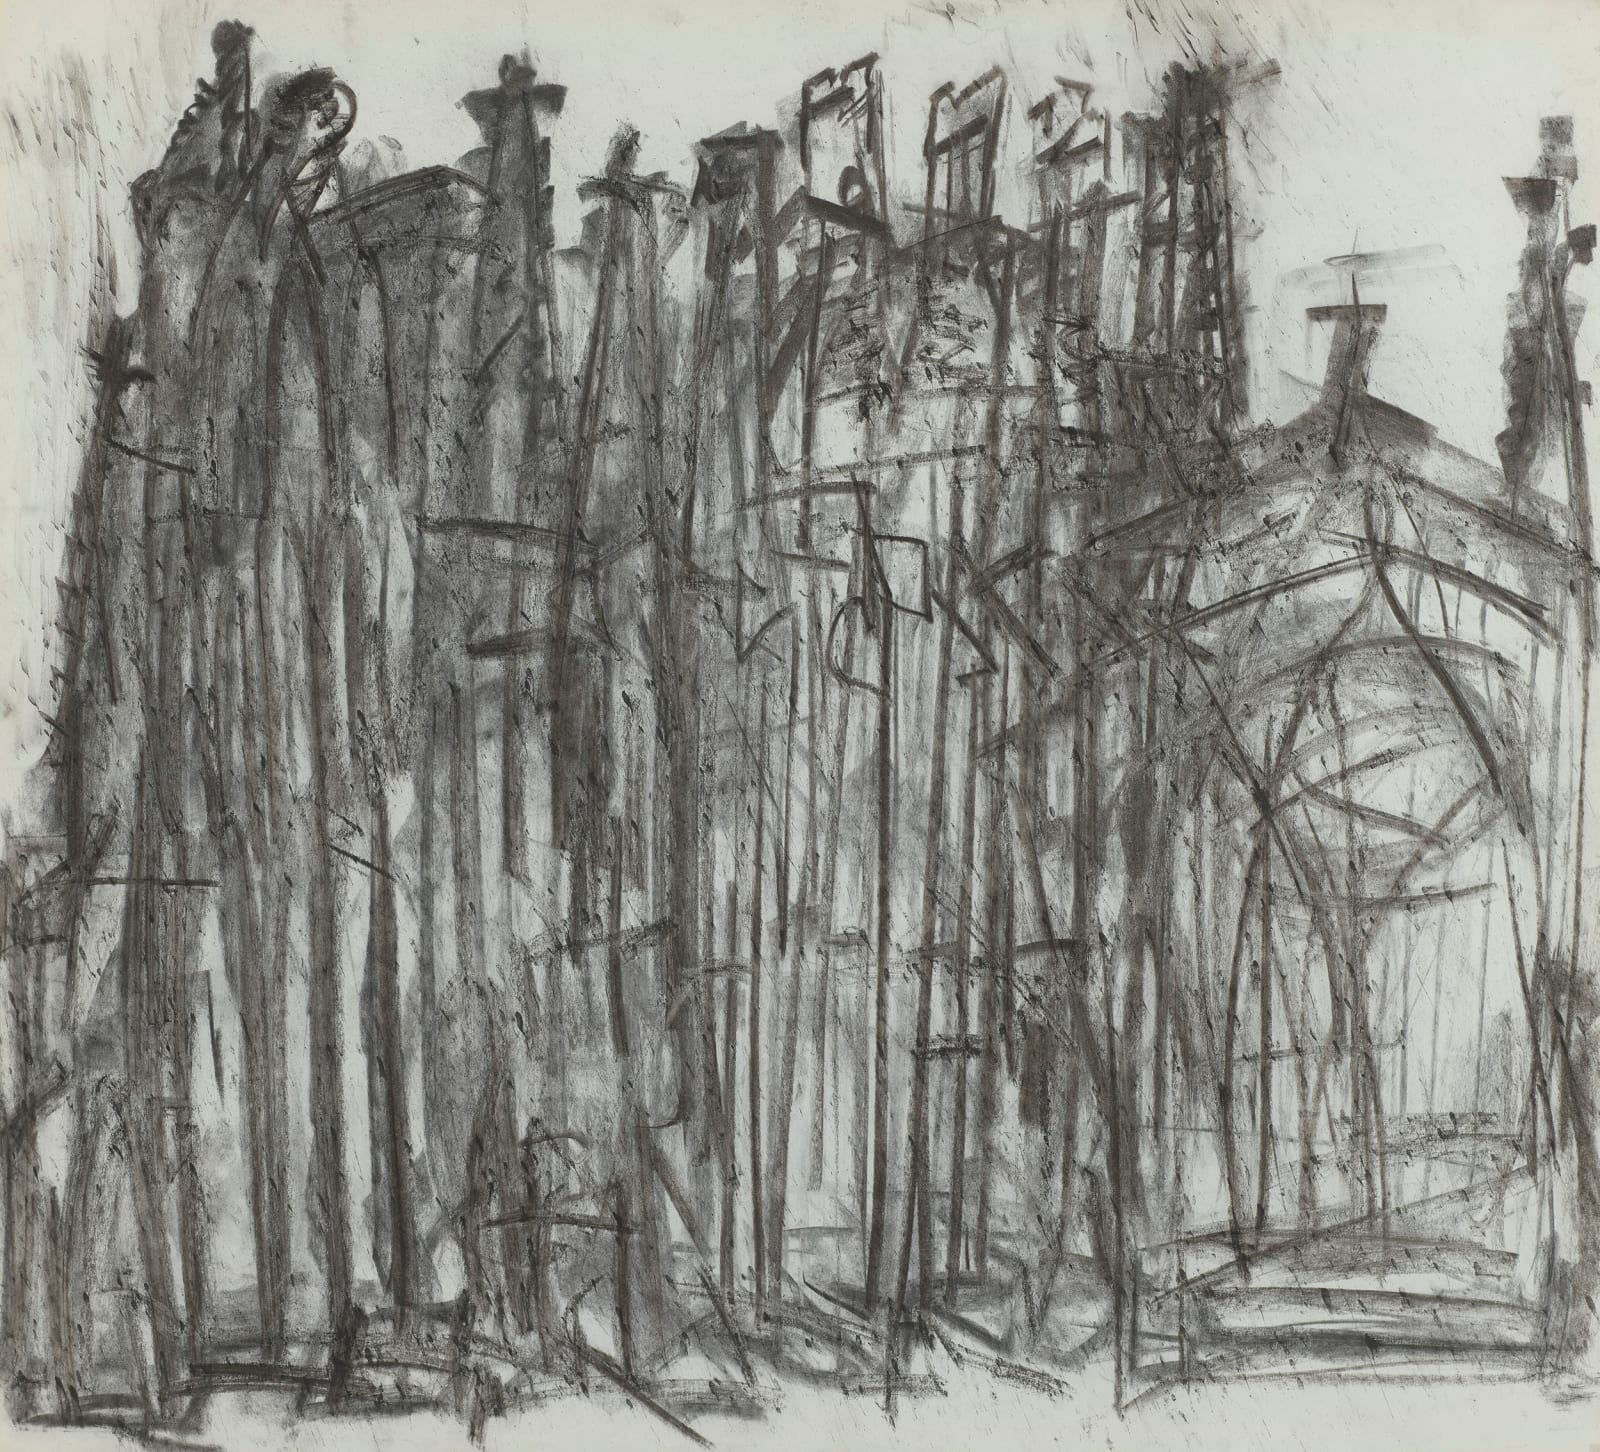 Dennis Creffield, Ely Cathedral from the East, 1989